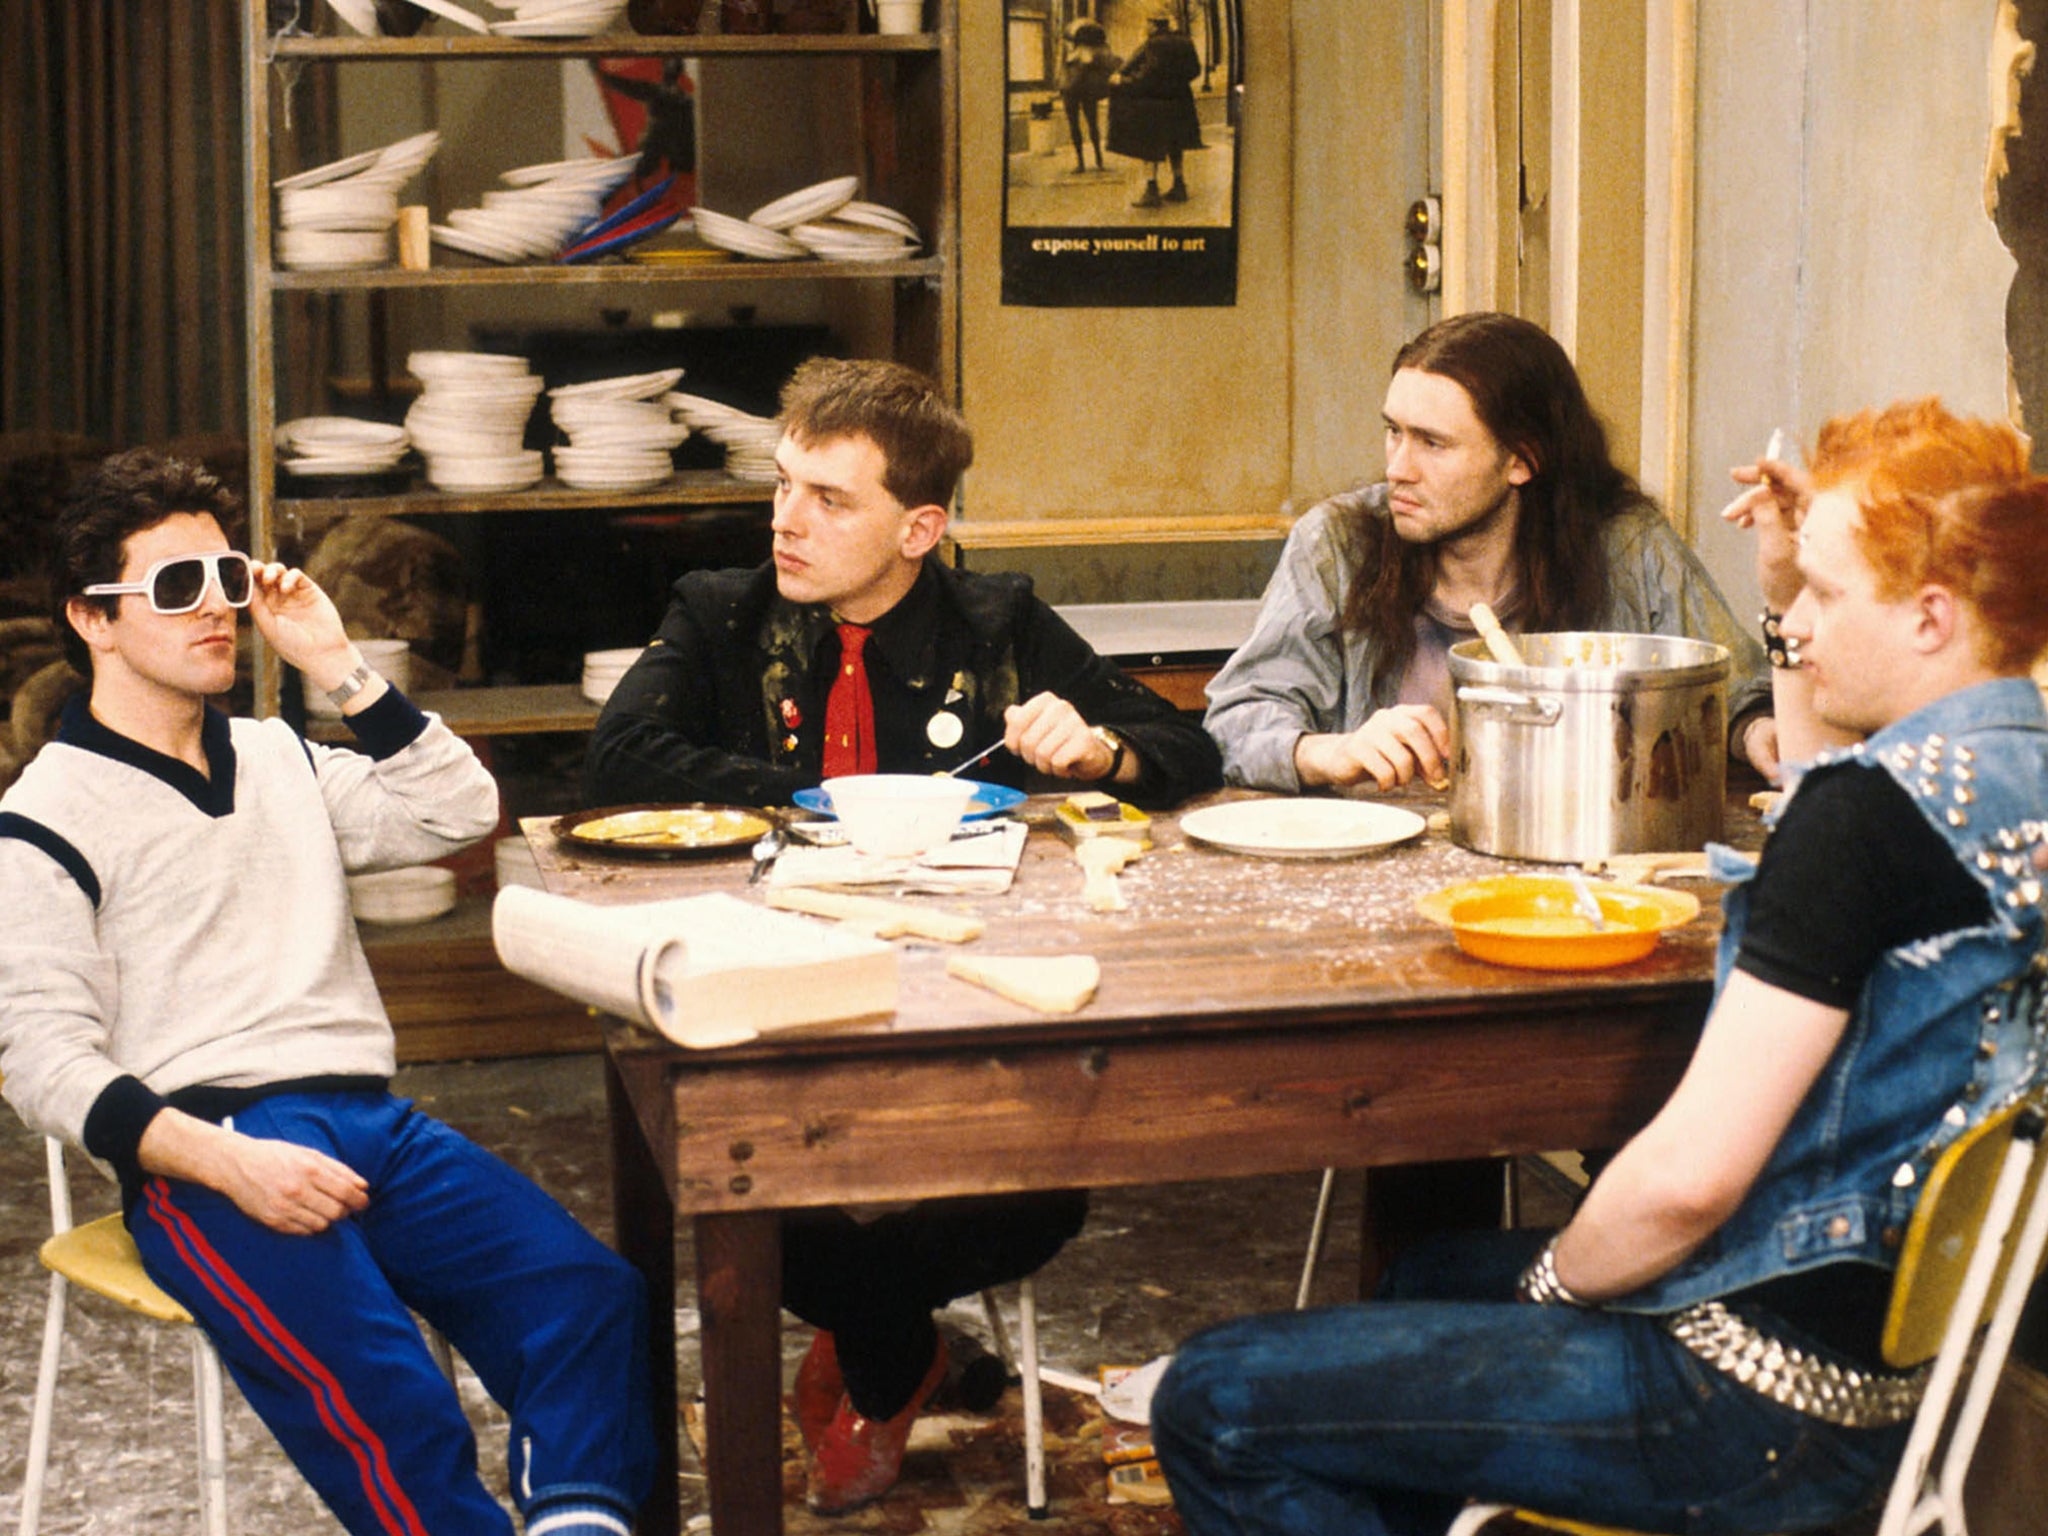 The undergraduate anarchy of ‘The Young Ones’, starring Christopher Ryan, Rik Mayall, Nigel Planer and Adrian Edmondson